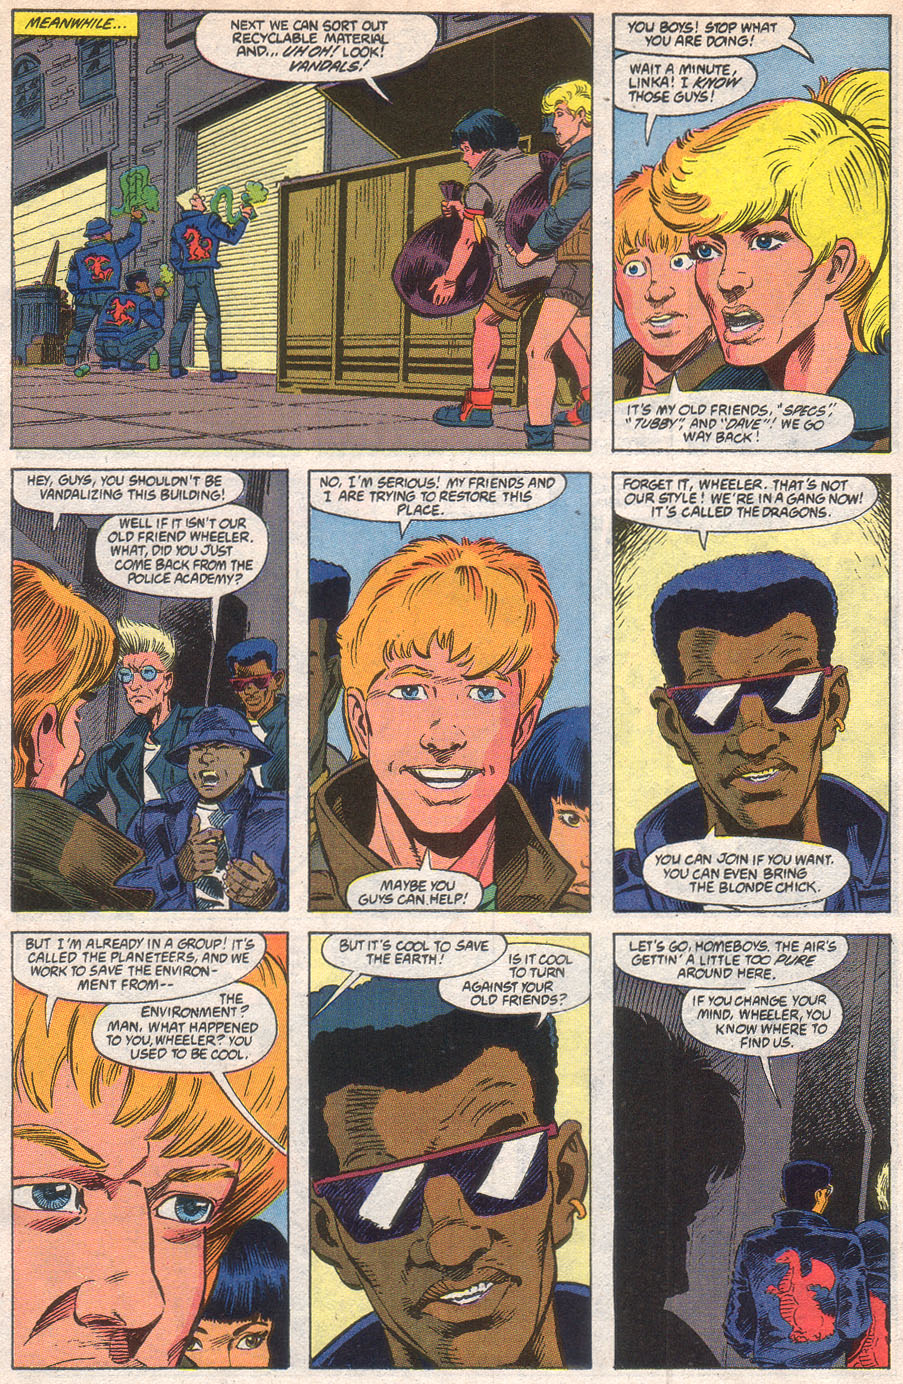 Captain Planet and the Planeteers 4 Page 5